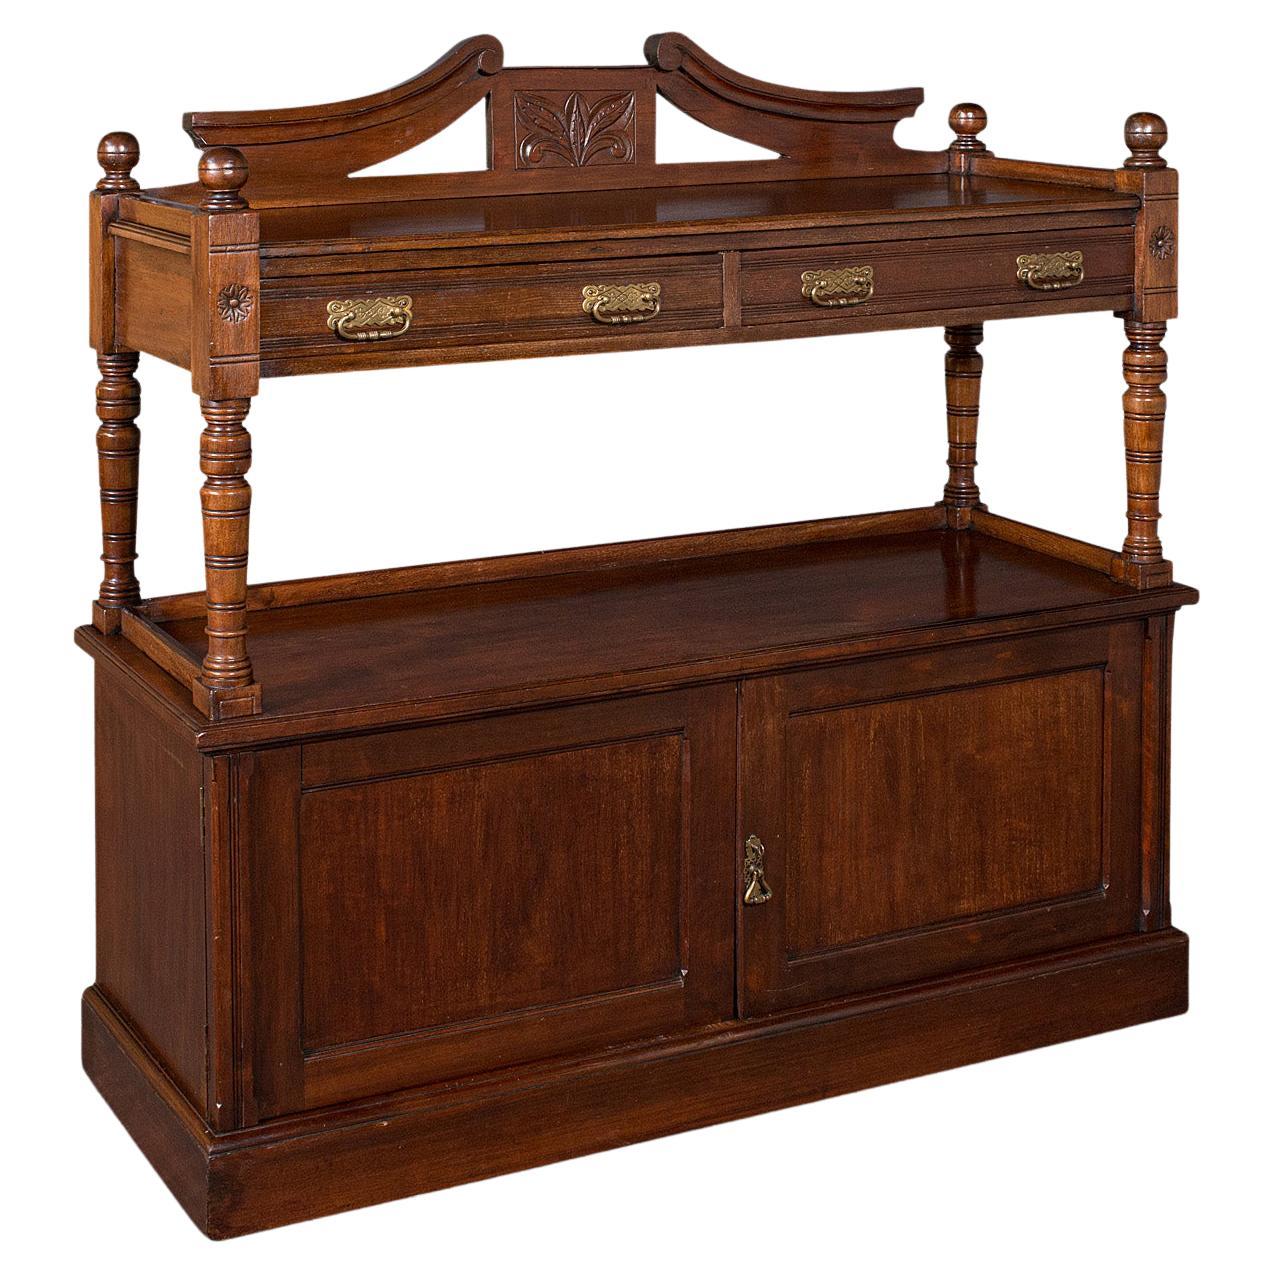 Large Antique Buffet, English, Walnut, Server, Sideboard, Victorian, Circa 1870 For Sale